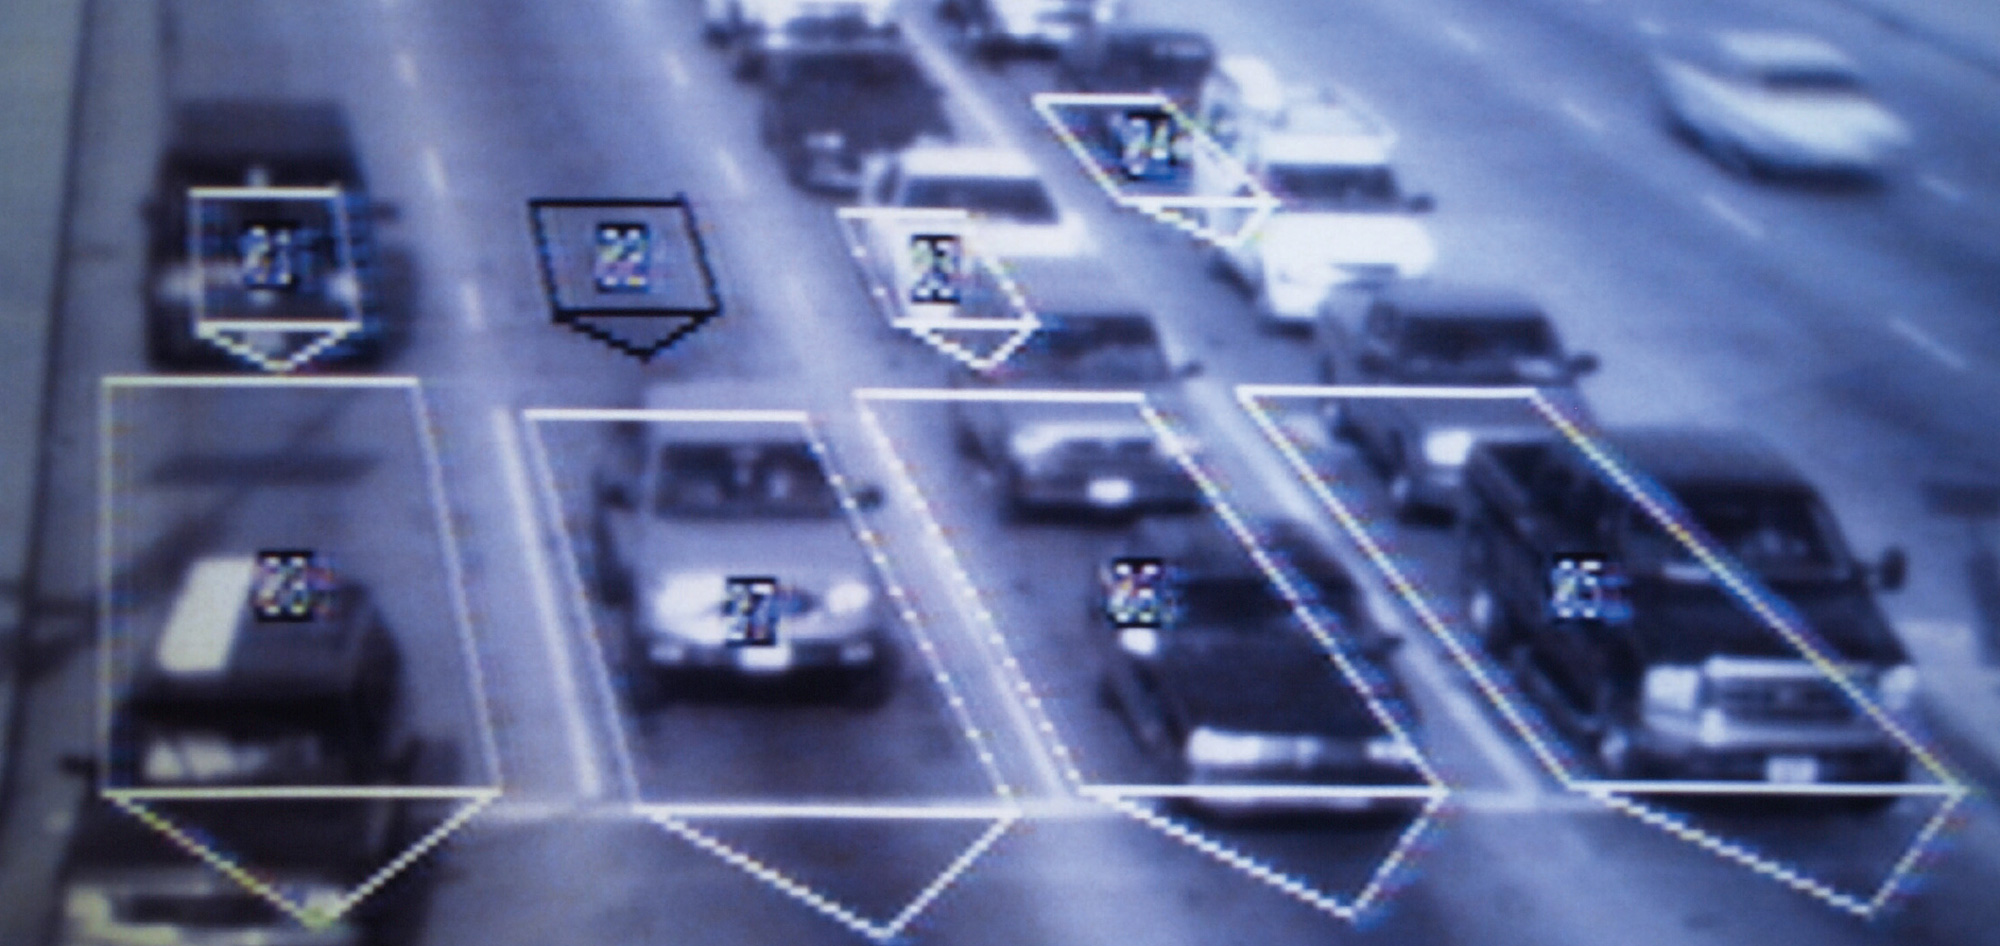 A still from a camera’s live video stream, which monitors traffic and controls speed and flow autonomously.